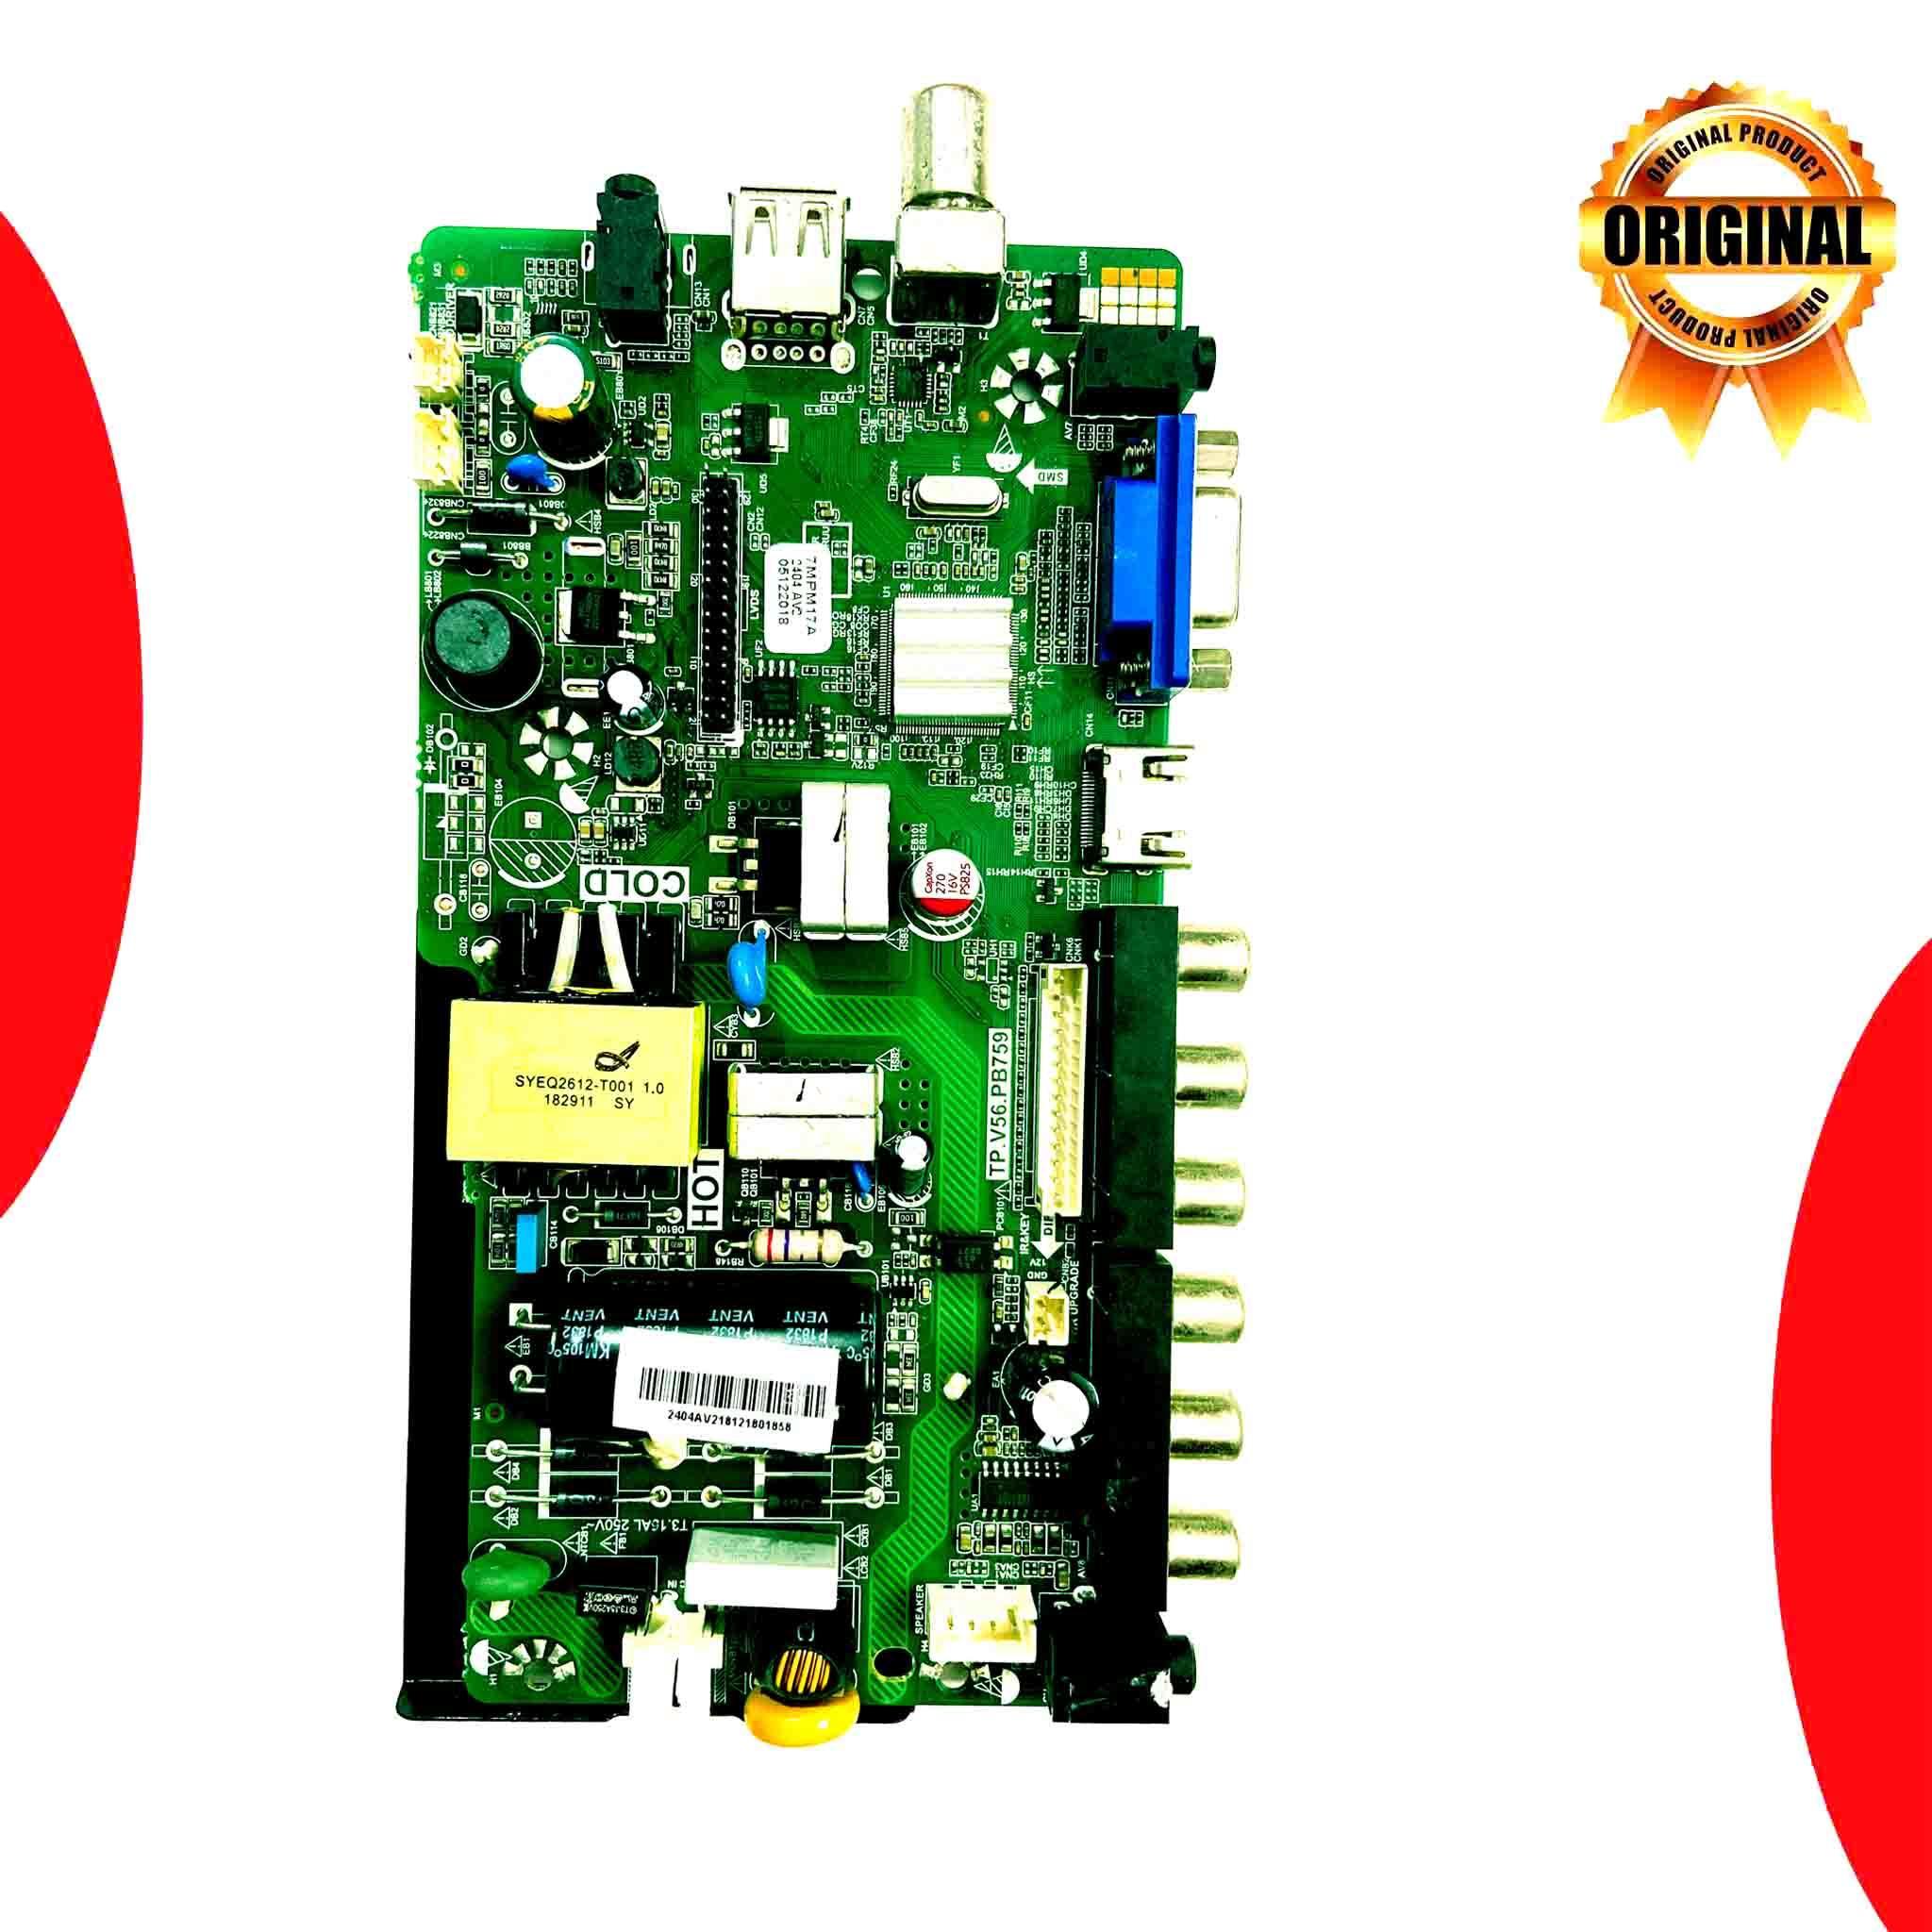 Sanyo 24 inch LED TV Motherboard for Model XT24S7000F - Great Bharat Electronics